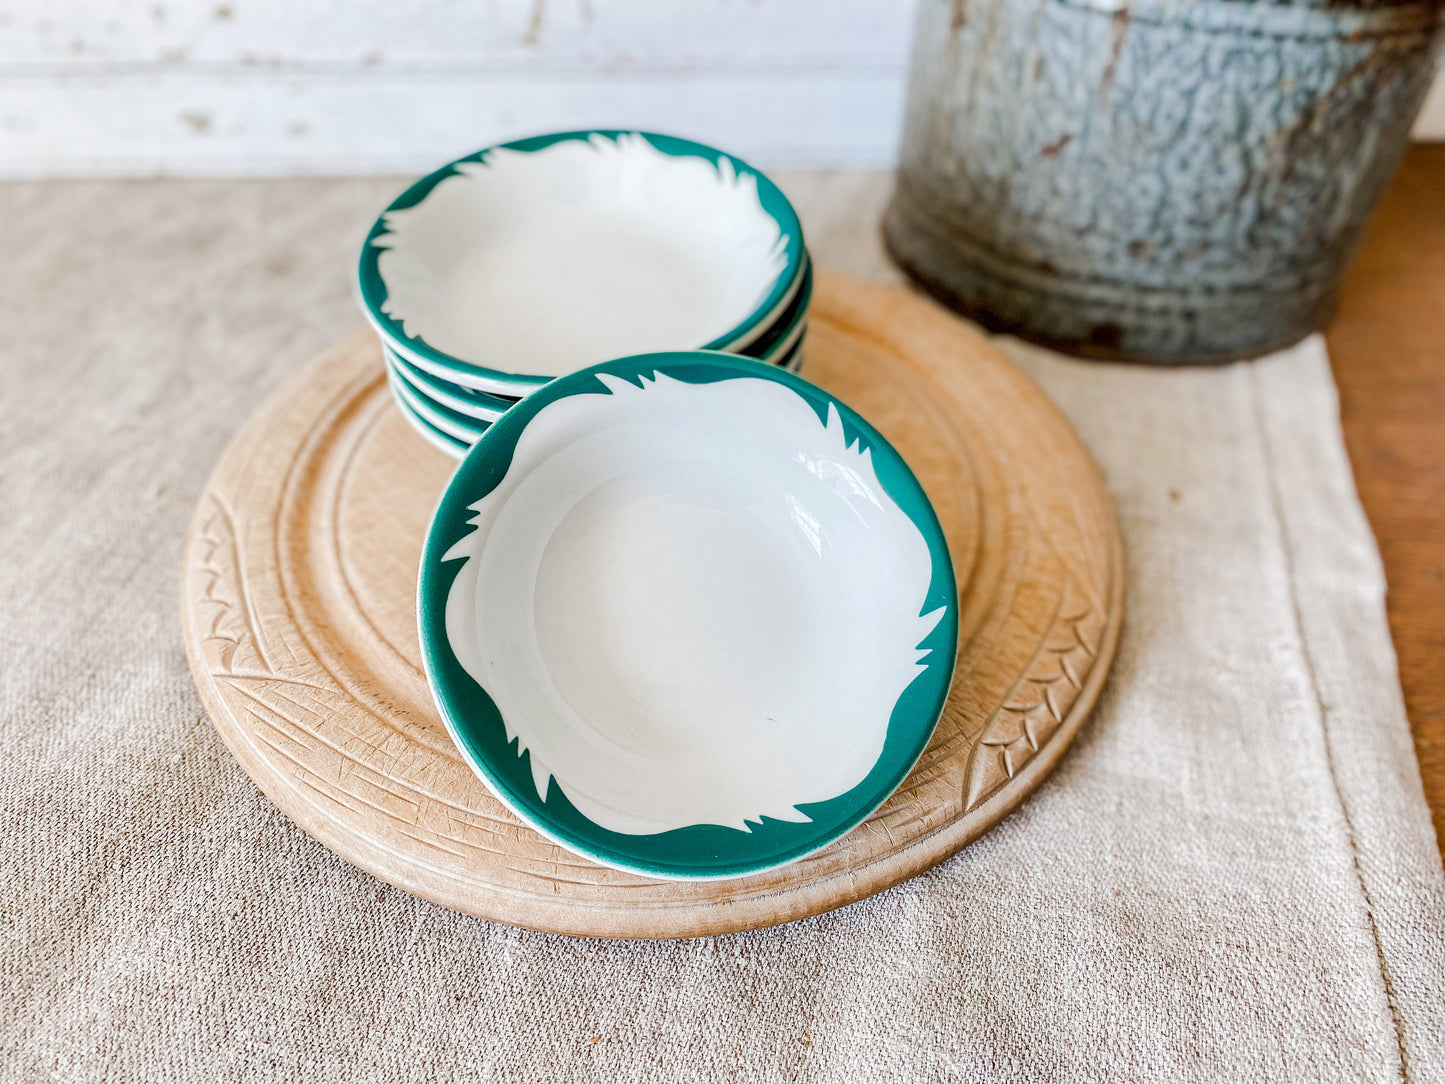 Set of 5 Vintage Berry Bowls | White and Green Caribe Puerto Rico 1960s Restaurant Ware